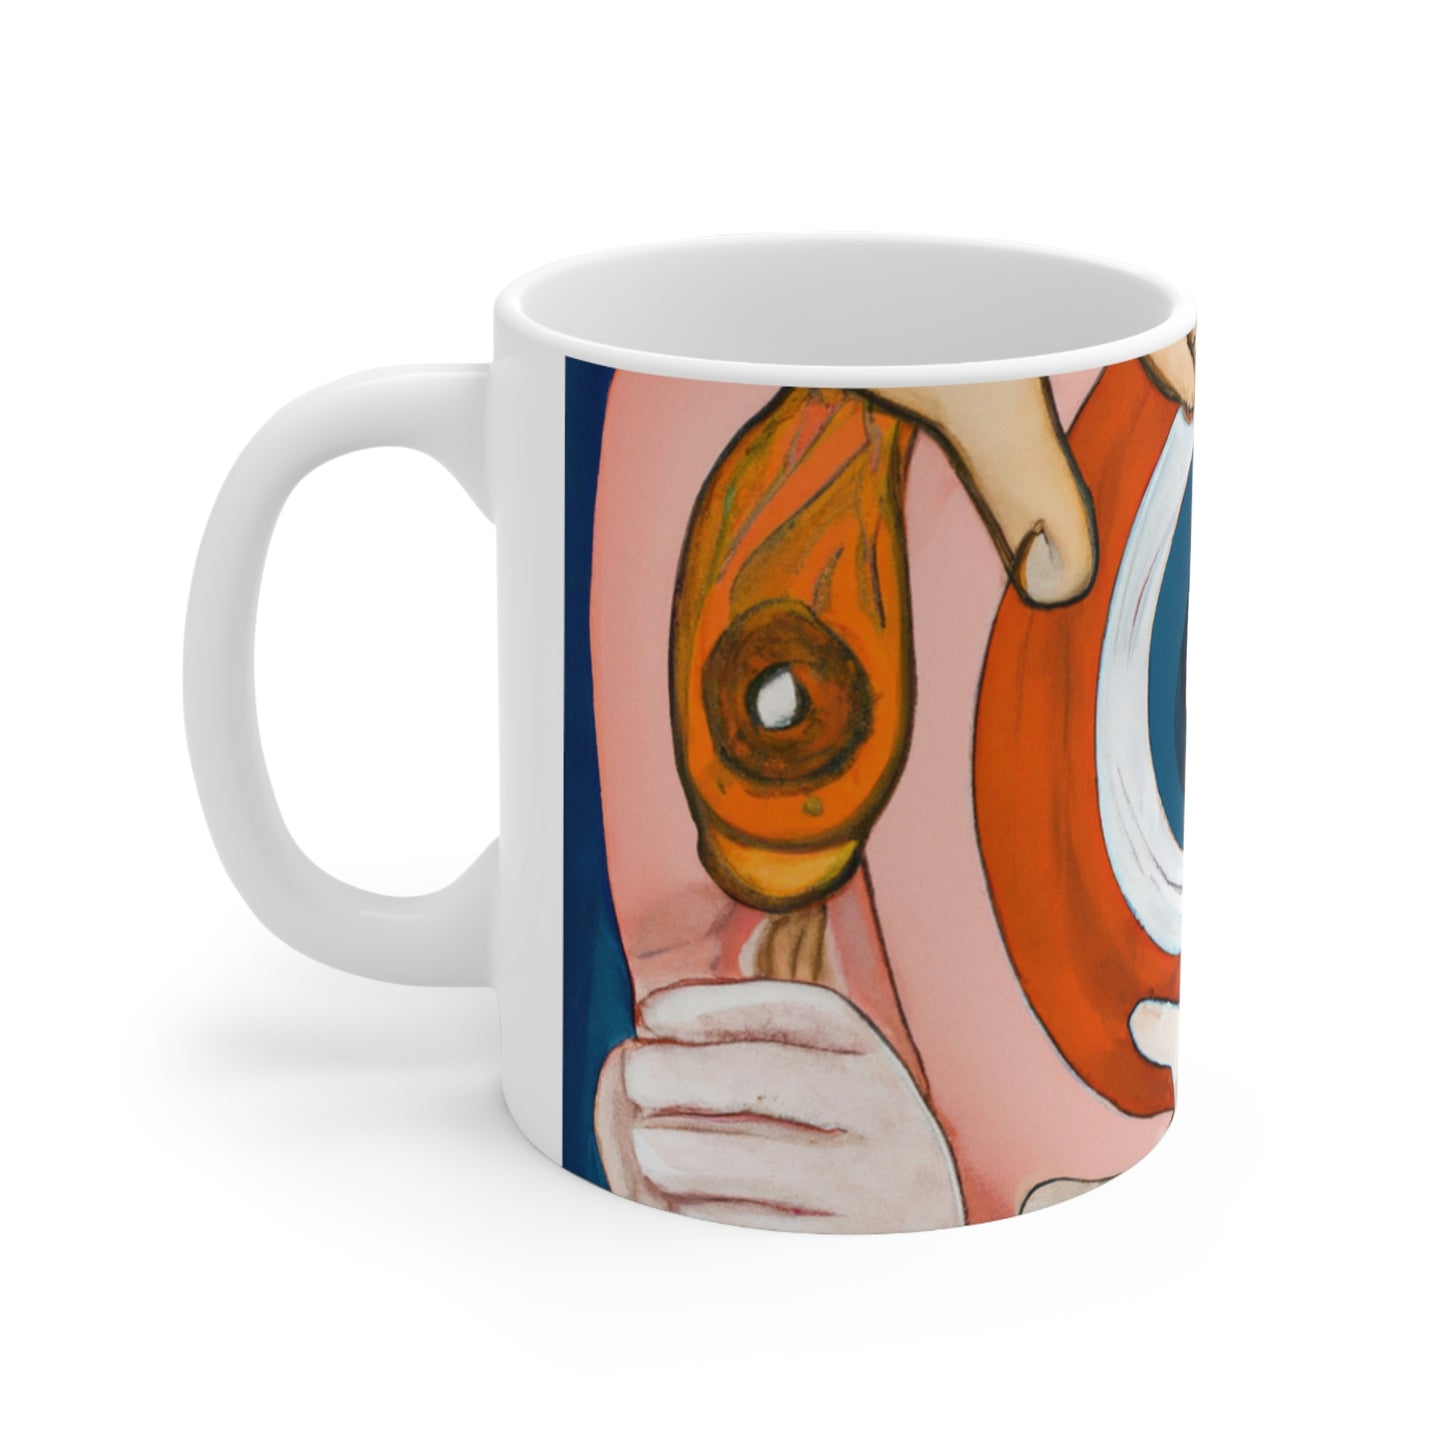 takes them on an adventure

A Twist of Magic: An Elderly Person's Unexpected Journey - The Alien Ceramic Mug 11 oz